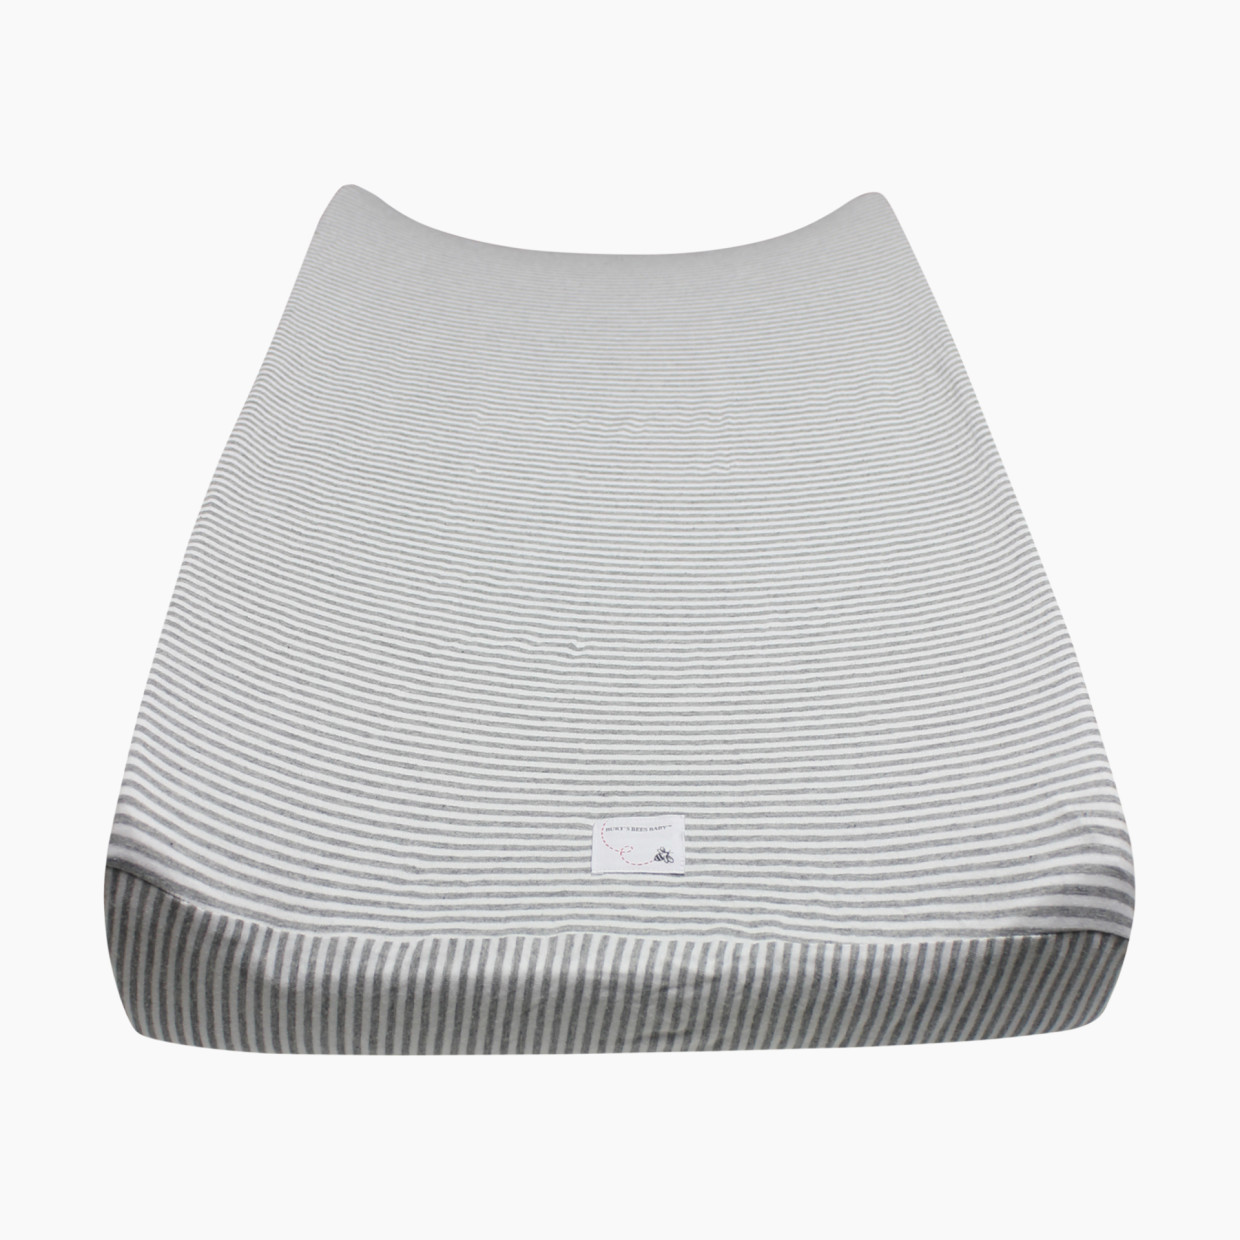 Burt's Bees Baby Organic Cotton Jersey Changing Pad Cover - Heather Grey Classic Stripe.